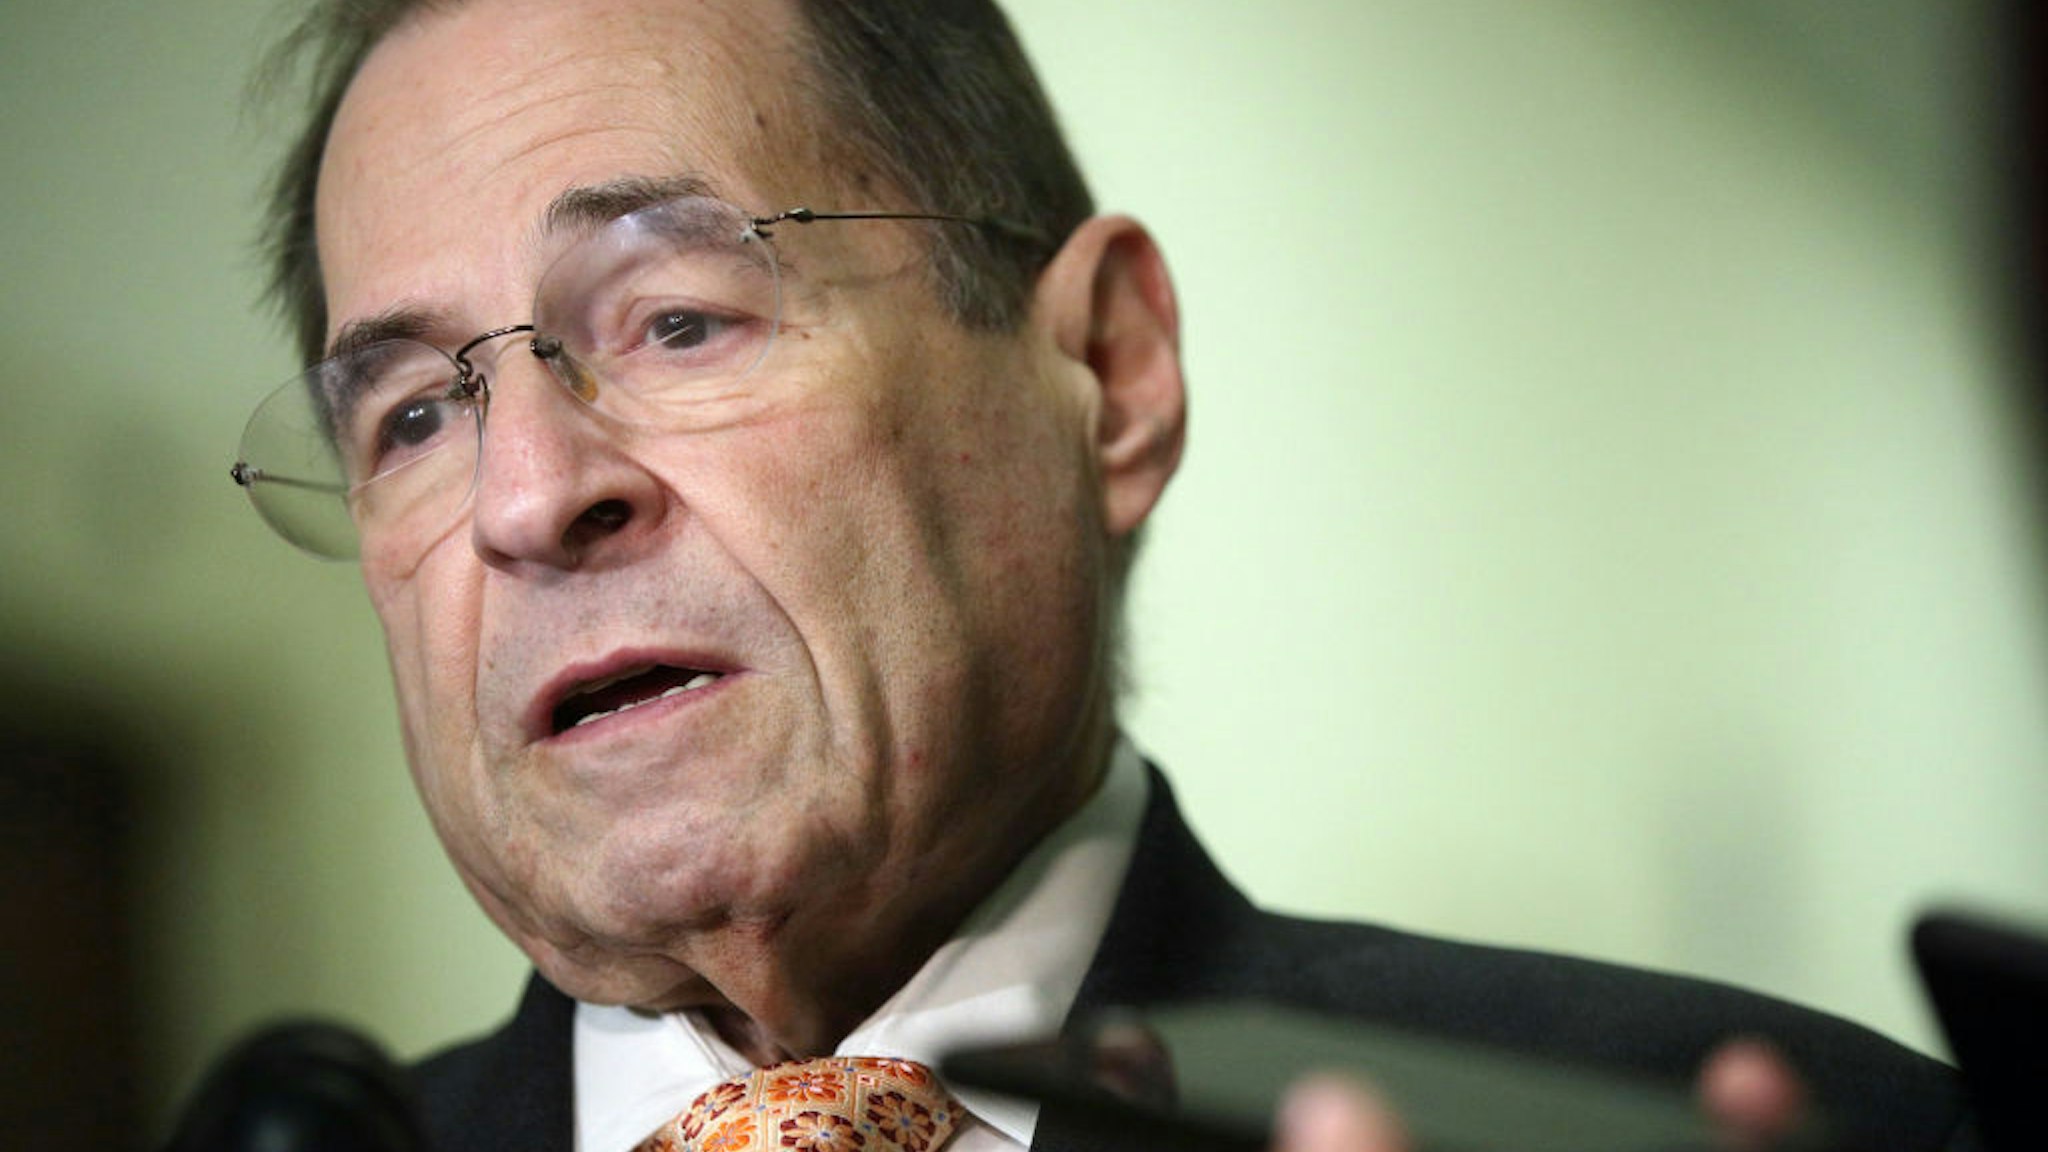 WASHINGTON, DC - JUNE 26: U.S. House Judiciary Committee Chairman Rep. Jerry Nadler (D-NY) speaks to members of the media at Rayburn House Office Building on Capitol Hill June 26, 2019 in Washington, DC. Special counsel Robert Mueller has agreed to testify on his investigation into President Donald Trump after a subpoena was issued by the House Judiciary and Intelligence Committees.